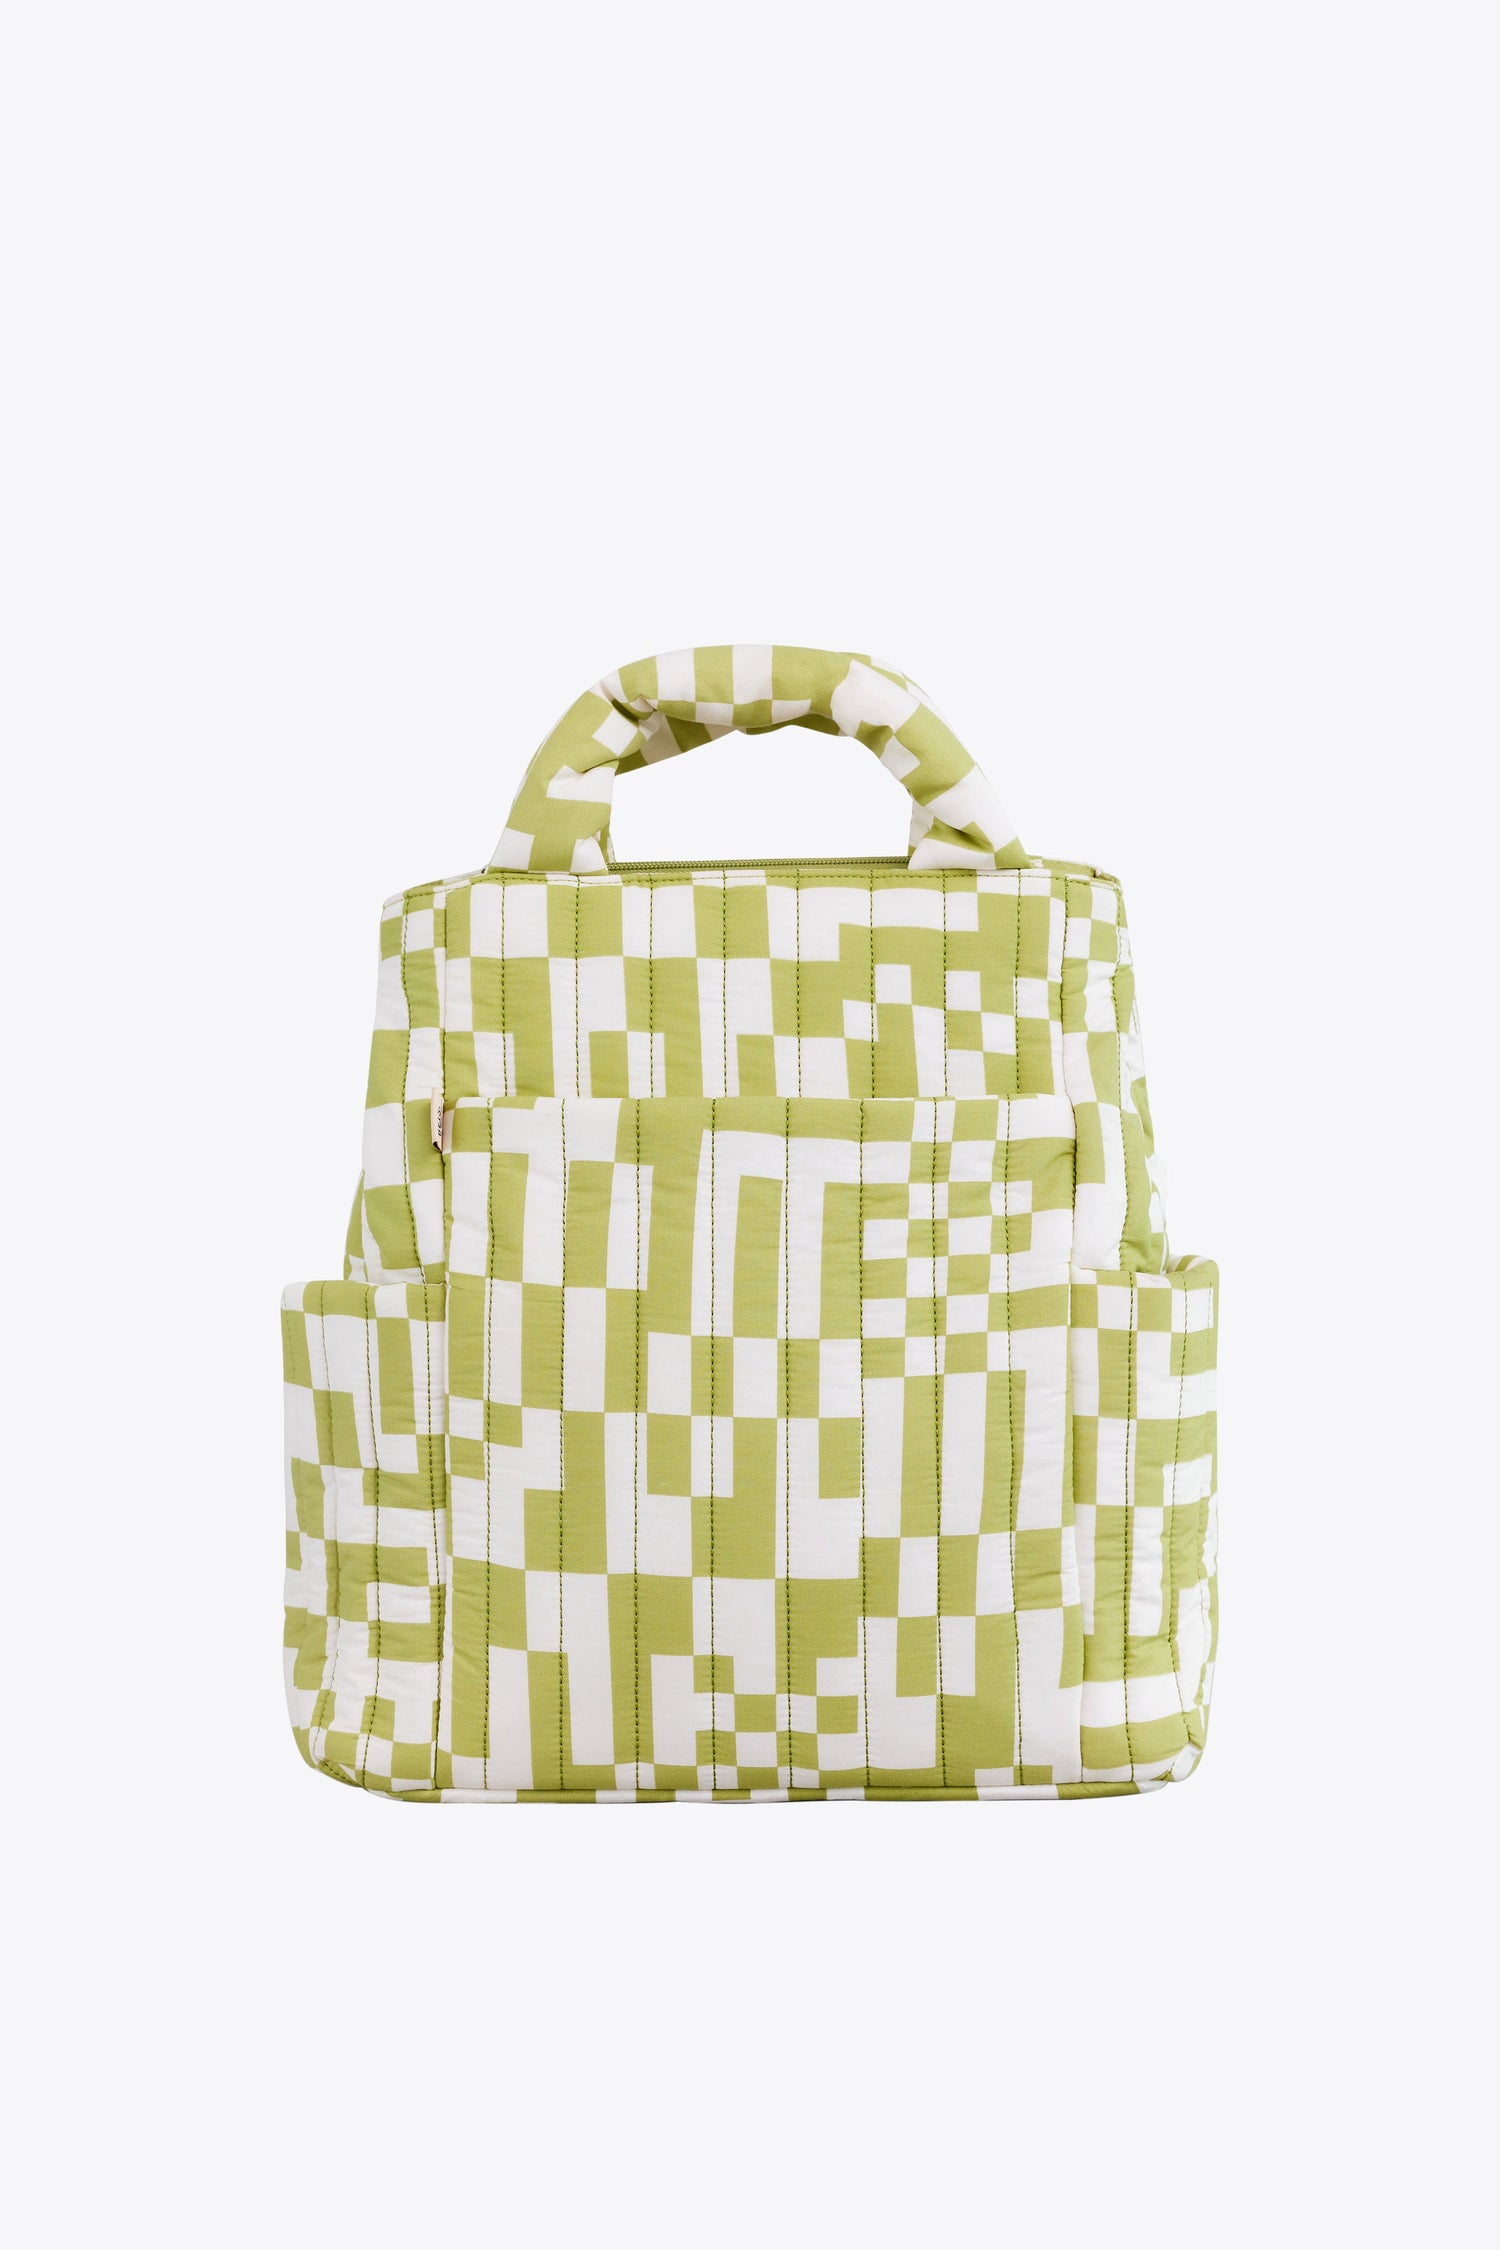 The Backpack Tote